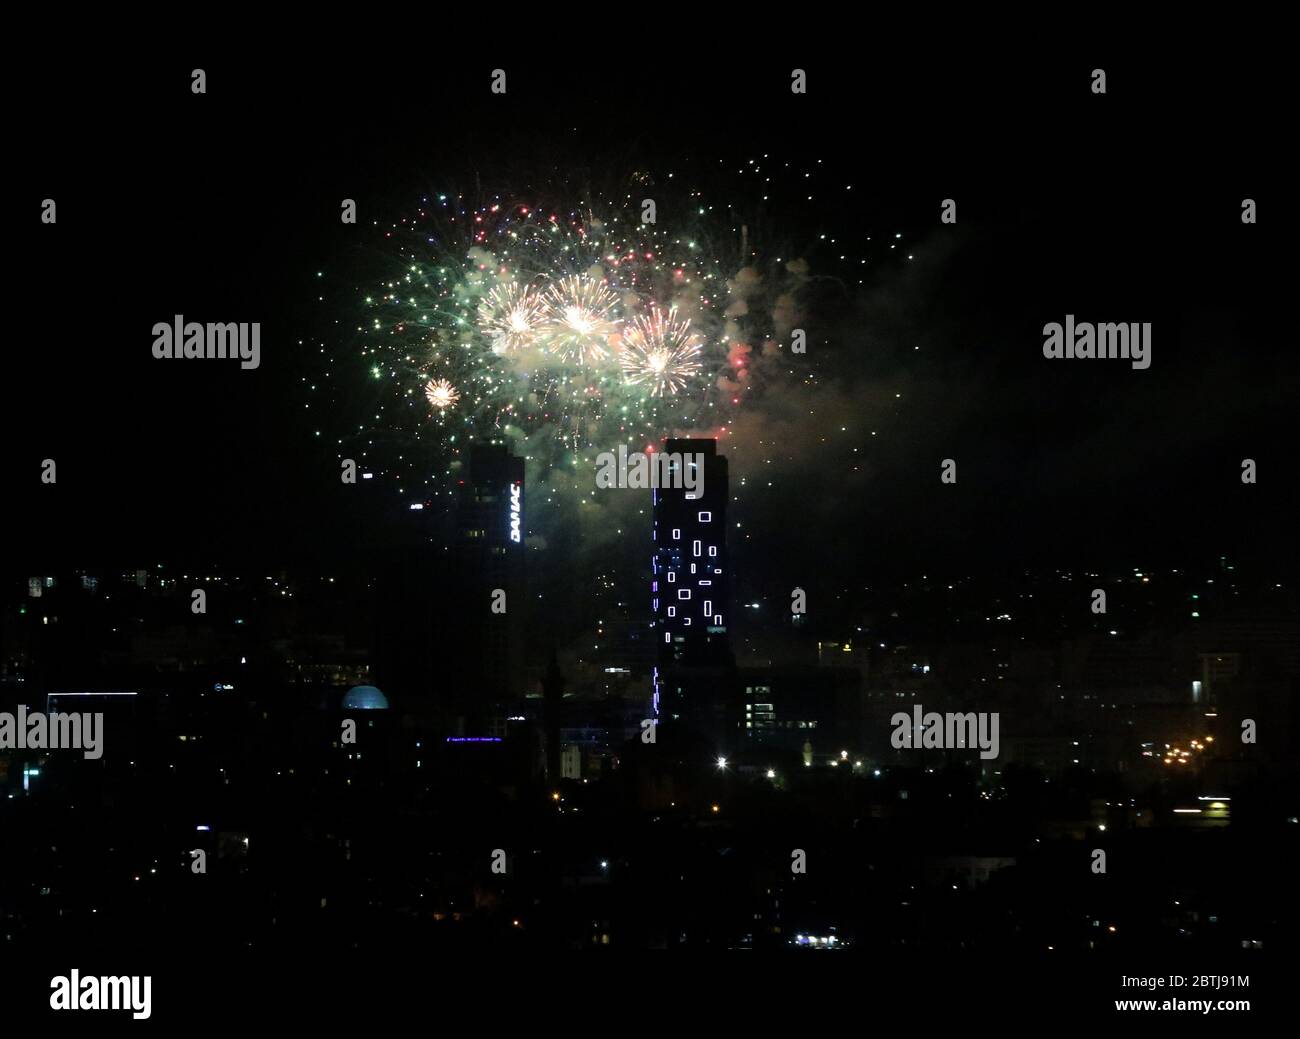 May 25, 2020: Amman, Jordan. 25 May 2020. Fireworks are displayed in Amman to celebrate the 74th anniversary of Jordan Independence Day. The commemoration of Jordan National Day, which is celebrated every year on 25th May, included fireworks, military parades, and a speech by King Abdullah II of Jordan. Independence Day marks the country's independence from British rule on 25 May 1946, and the following declaration of the Hashemite Kingdom of Jordan. The national flag was widely displayed to symbolise the significance of the day for the country (Credit Image: © Stringer/IMAGESLIVE via ZUMA Stock Photo